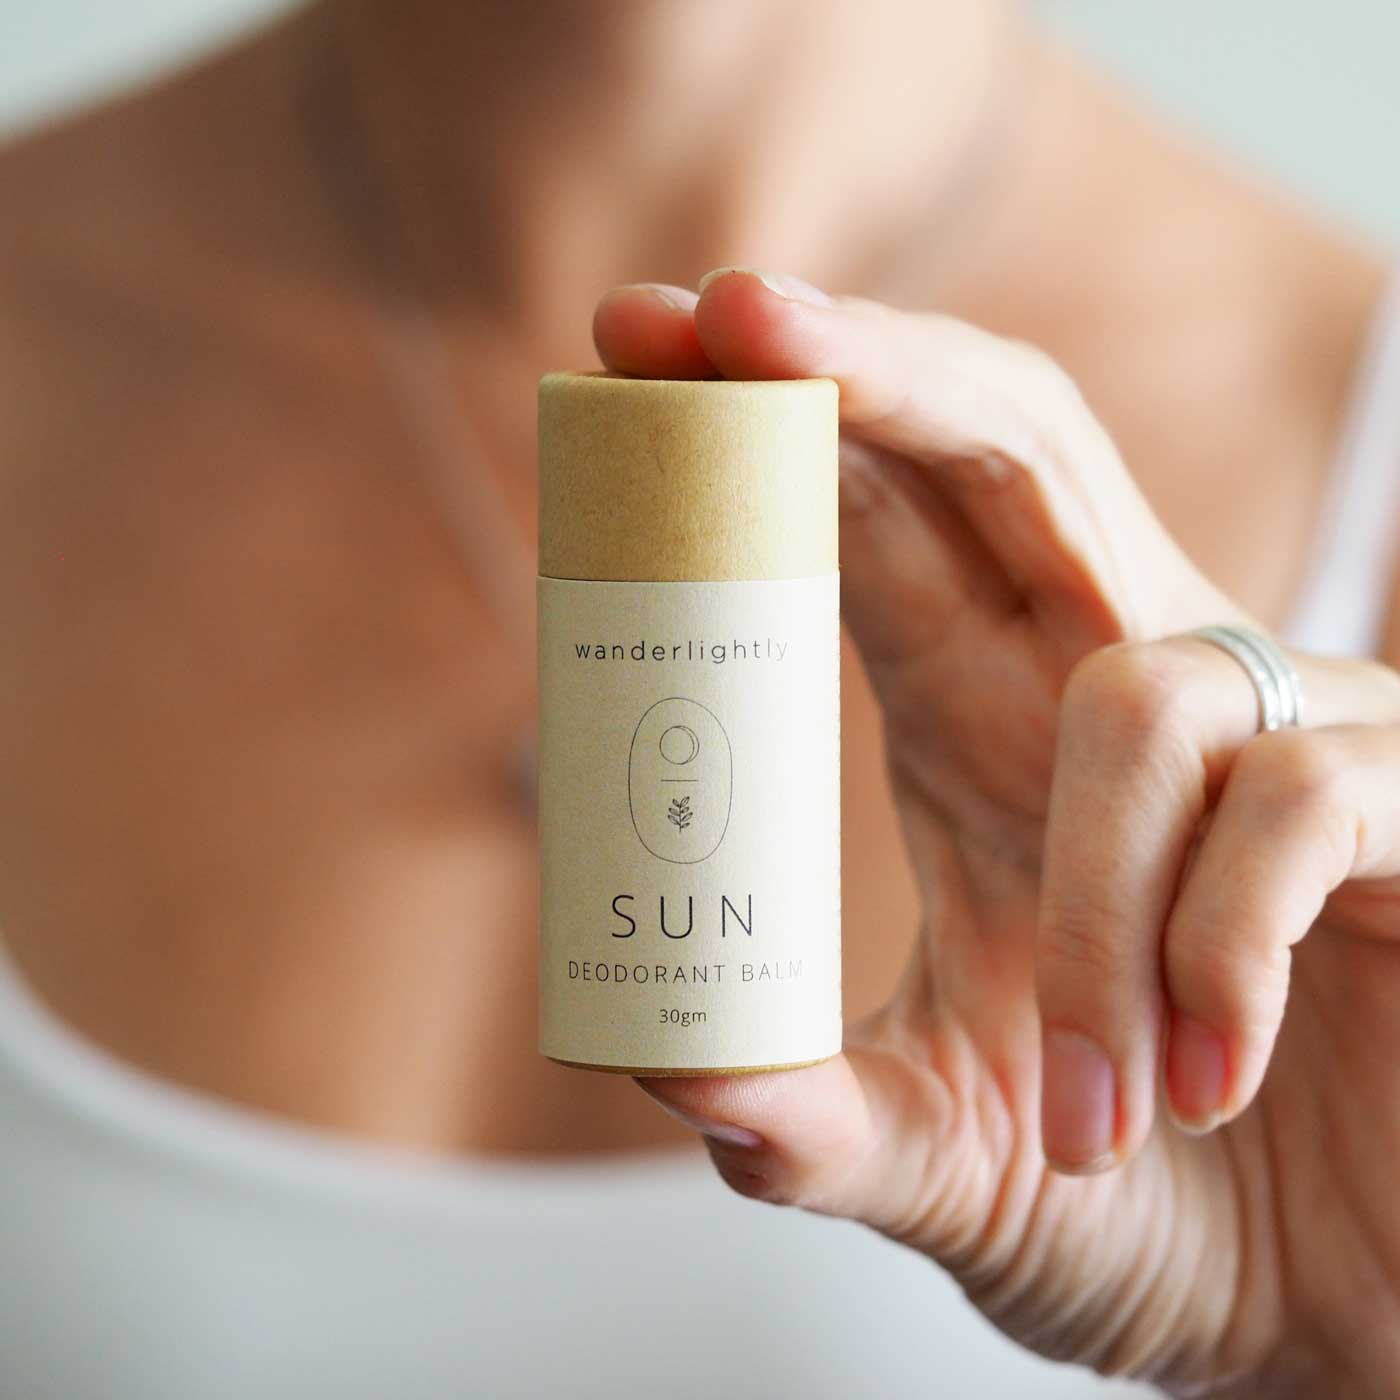 Wanderlightly all-natural sun-deodorant balm in a recyclable cardboard tube being held by a lady.